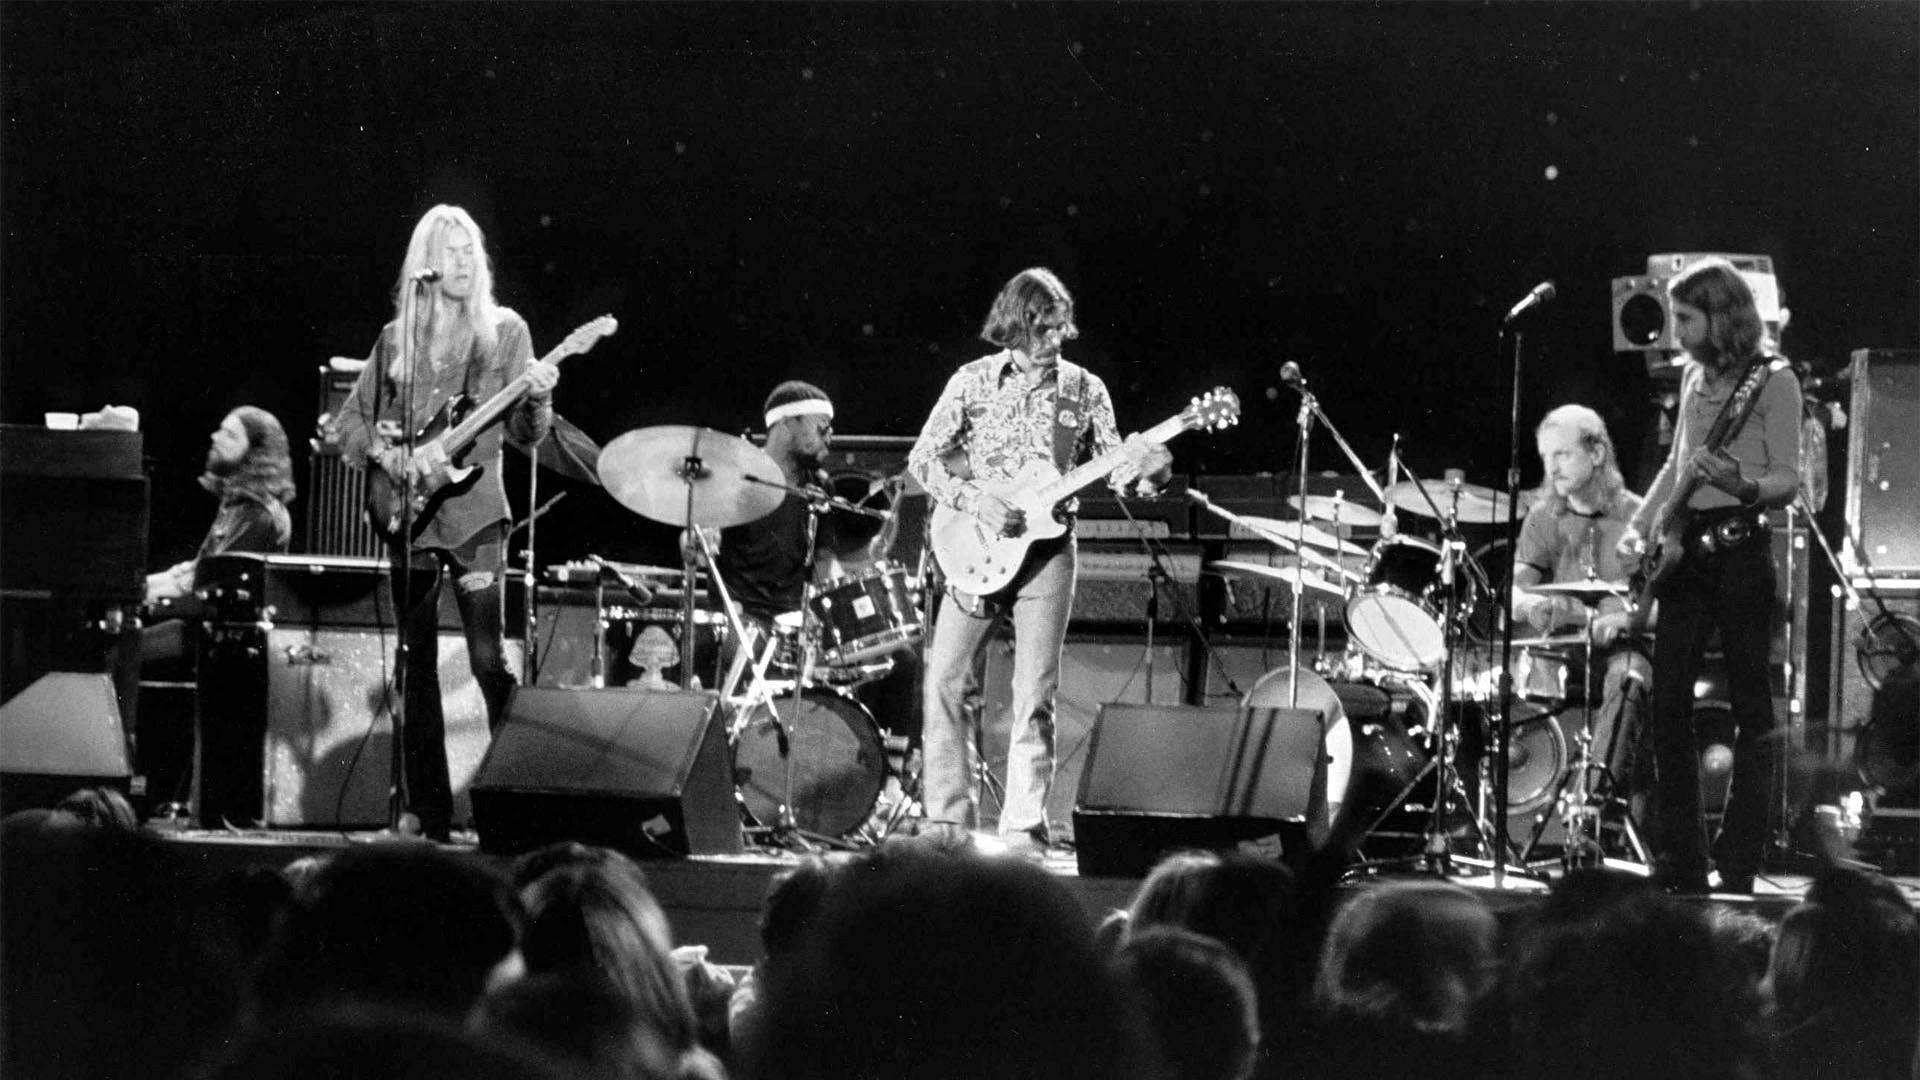 Allman Brothers Band Grayscale Concert Photo Wallpaper